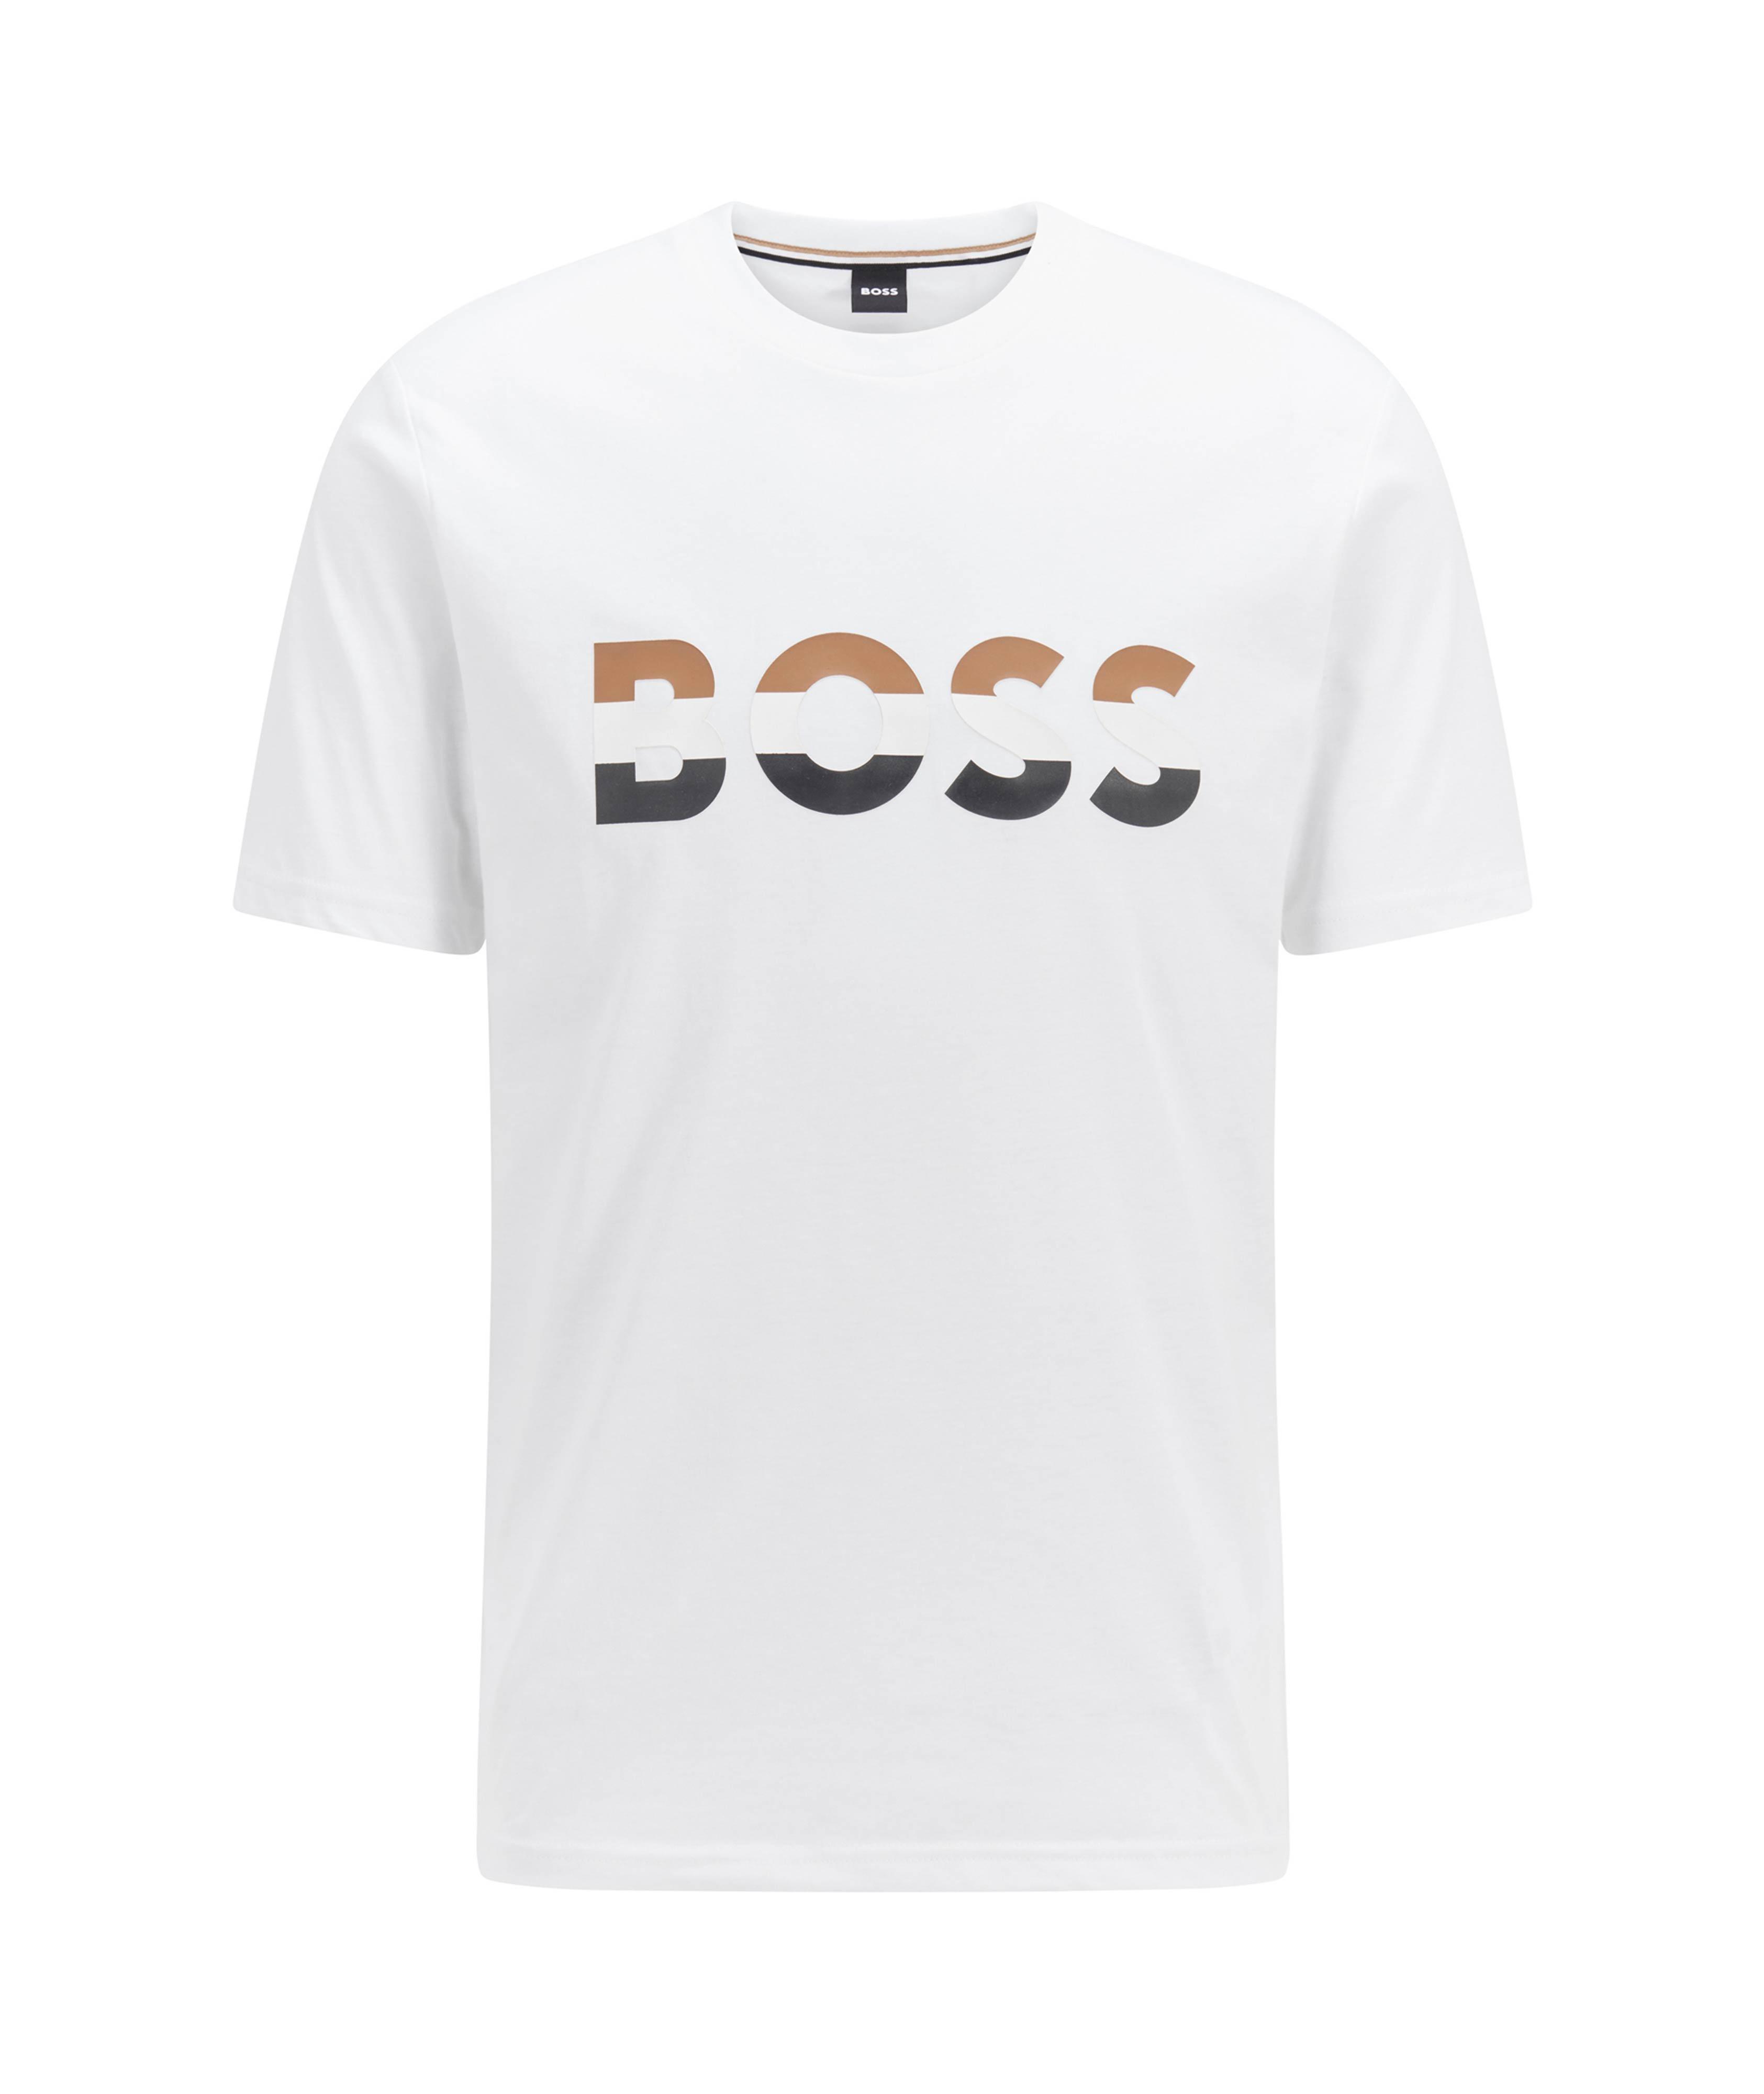 Cotton-Blend T-Shirt with Graphic Logo  image 0